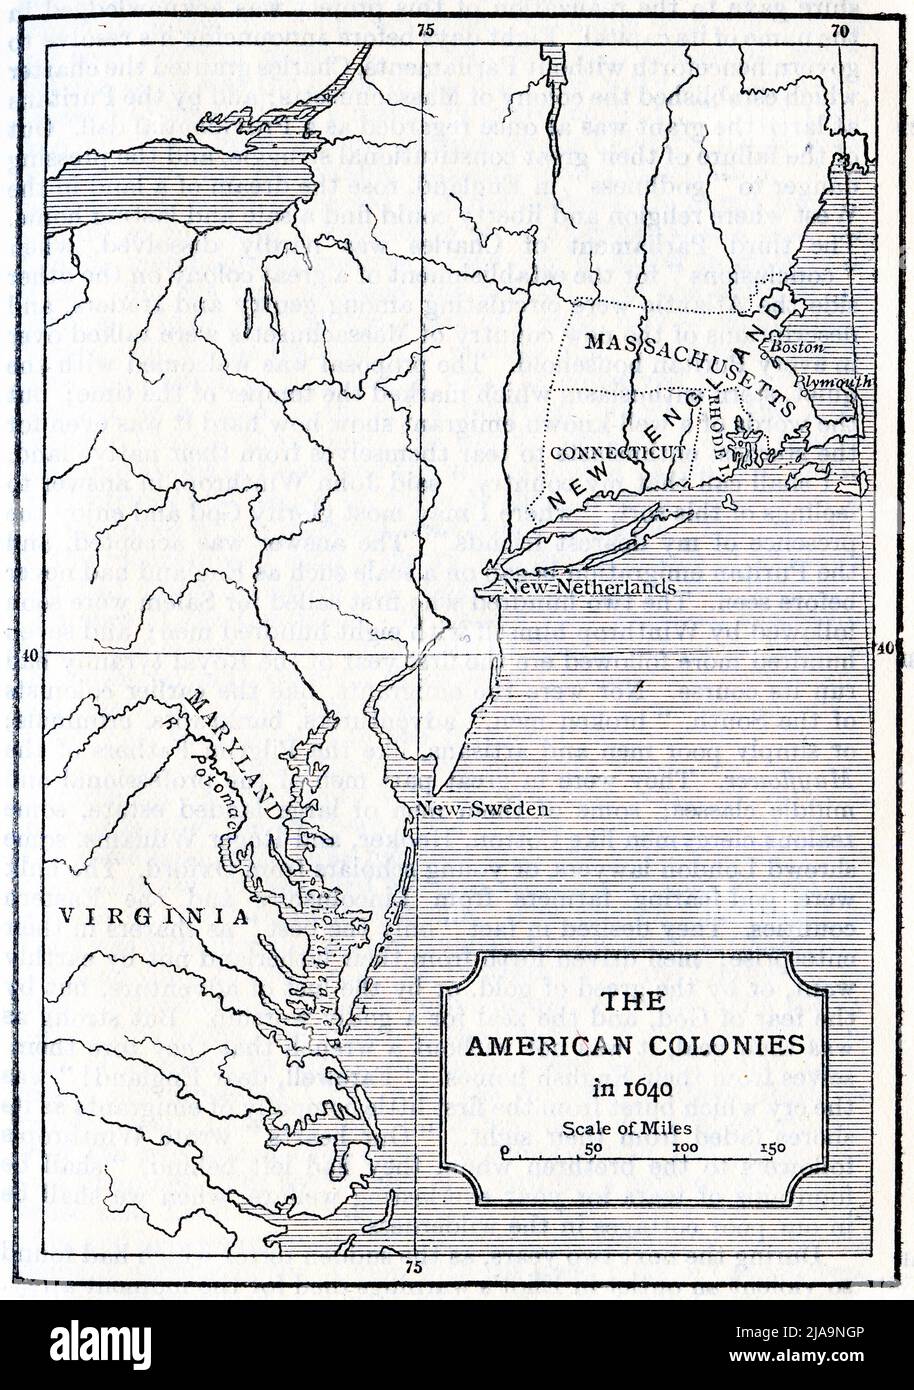 the American colonies in 1640 Stock Photo